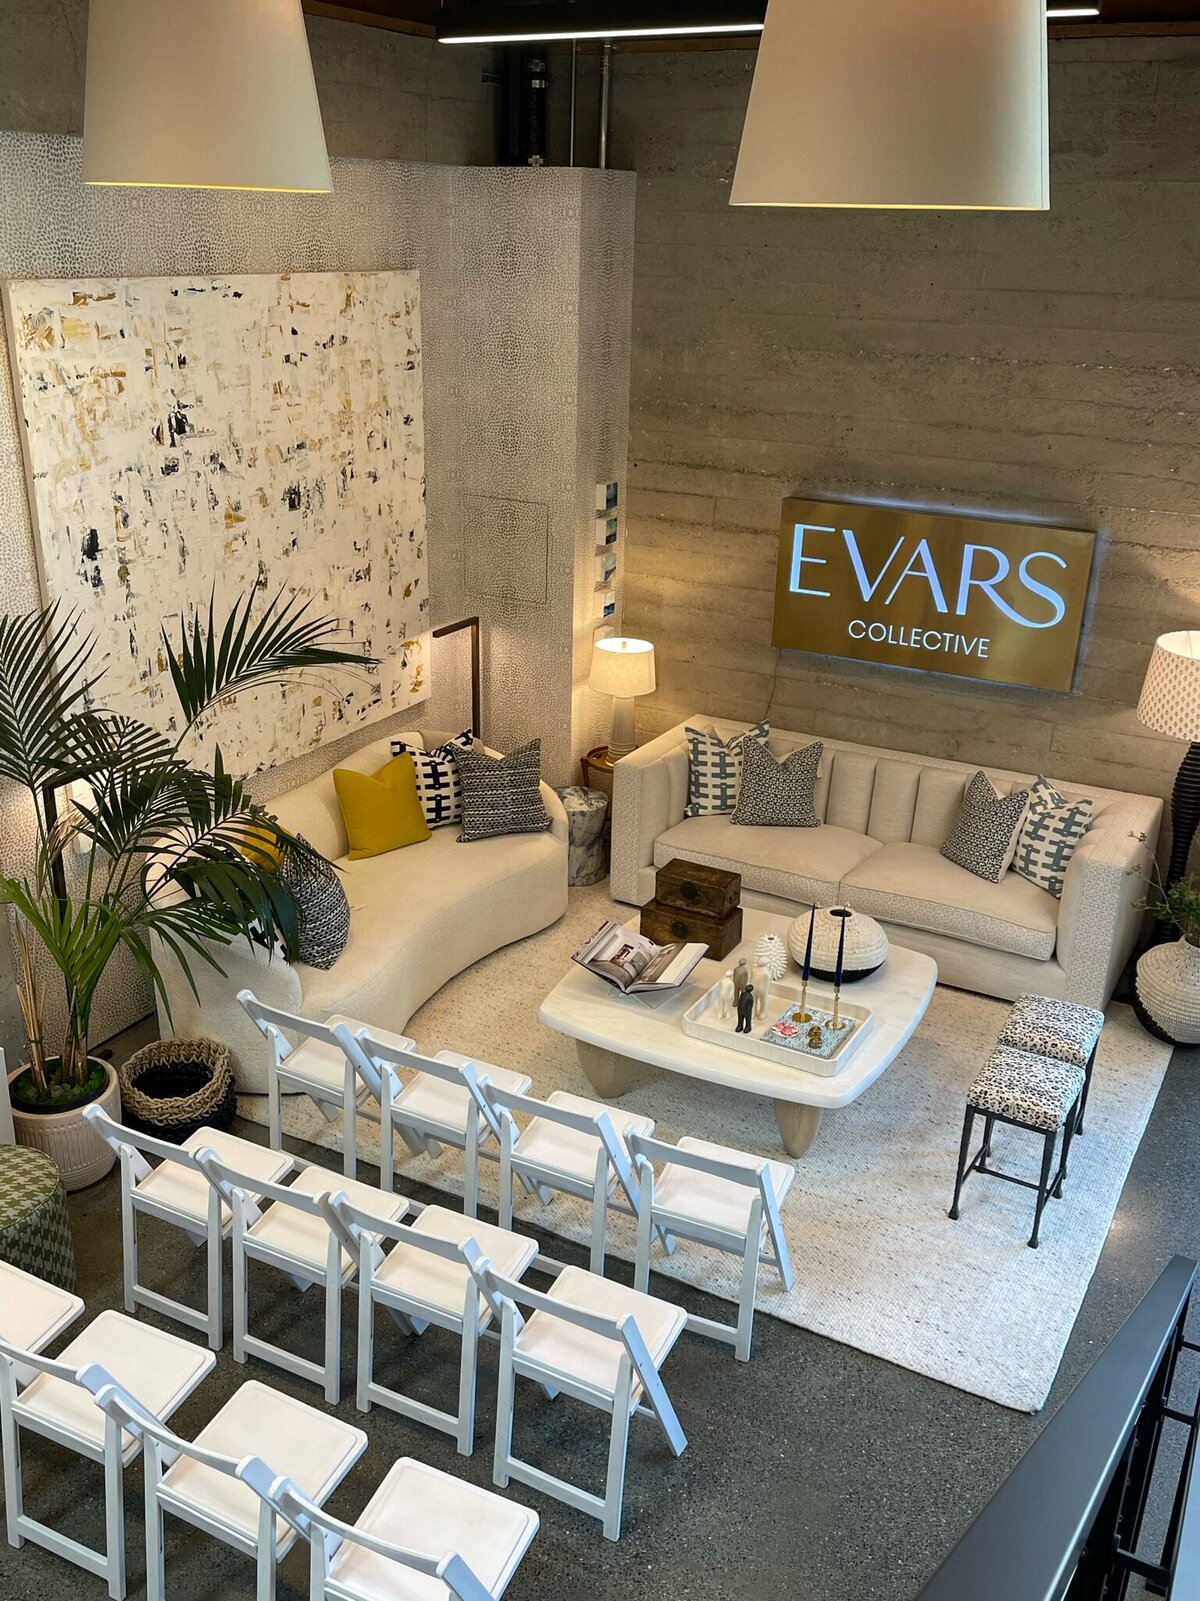 evars collective events22